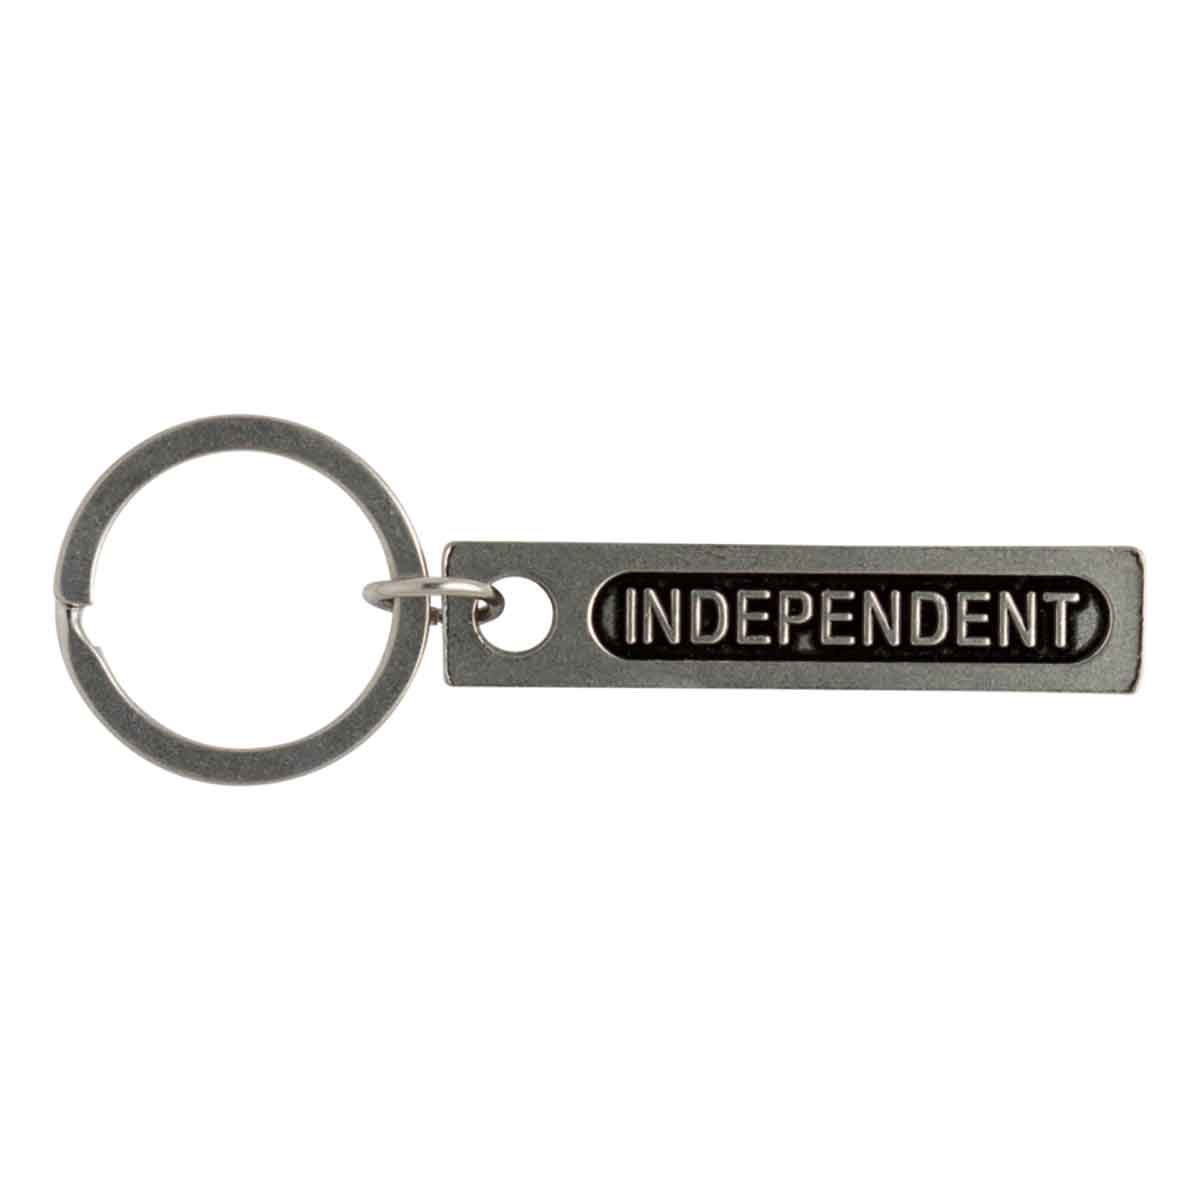 Independent Baseplate Key Chain Antique Nickle